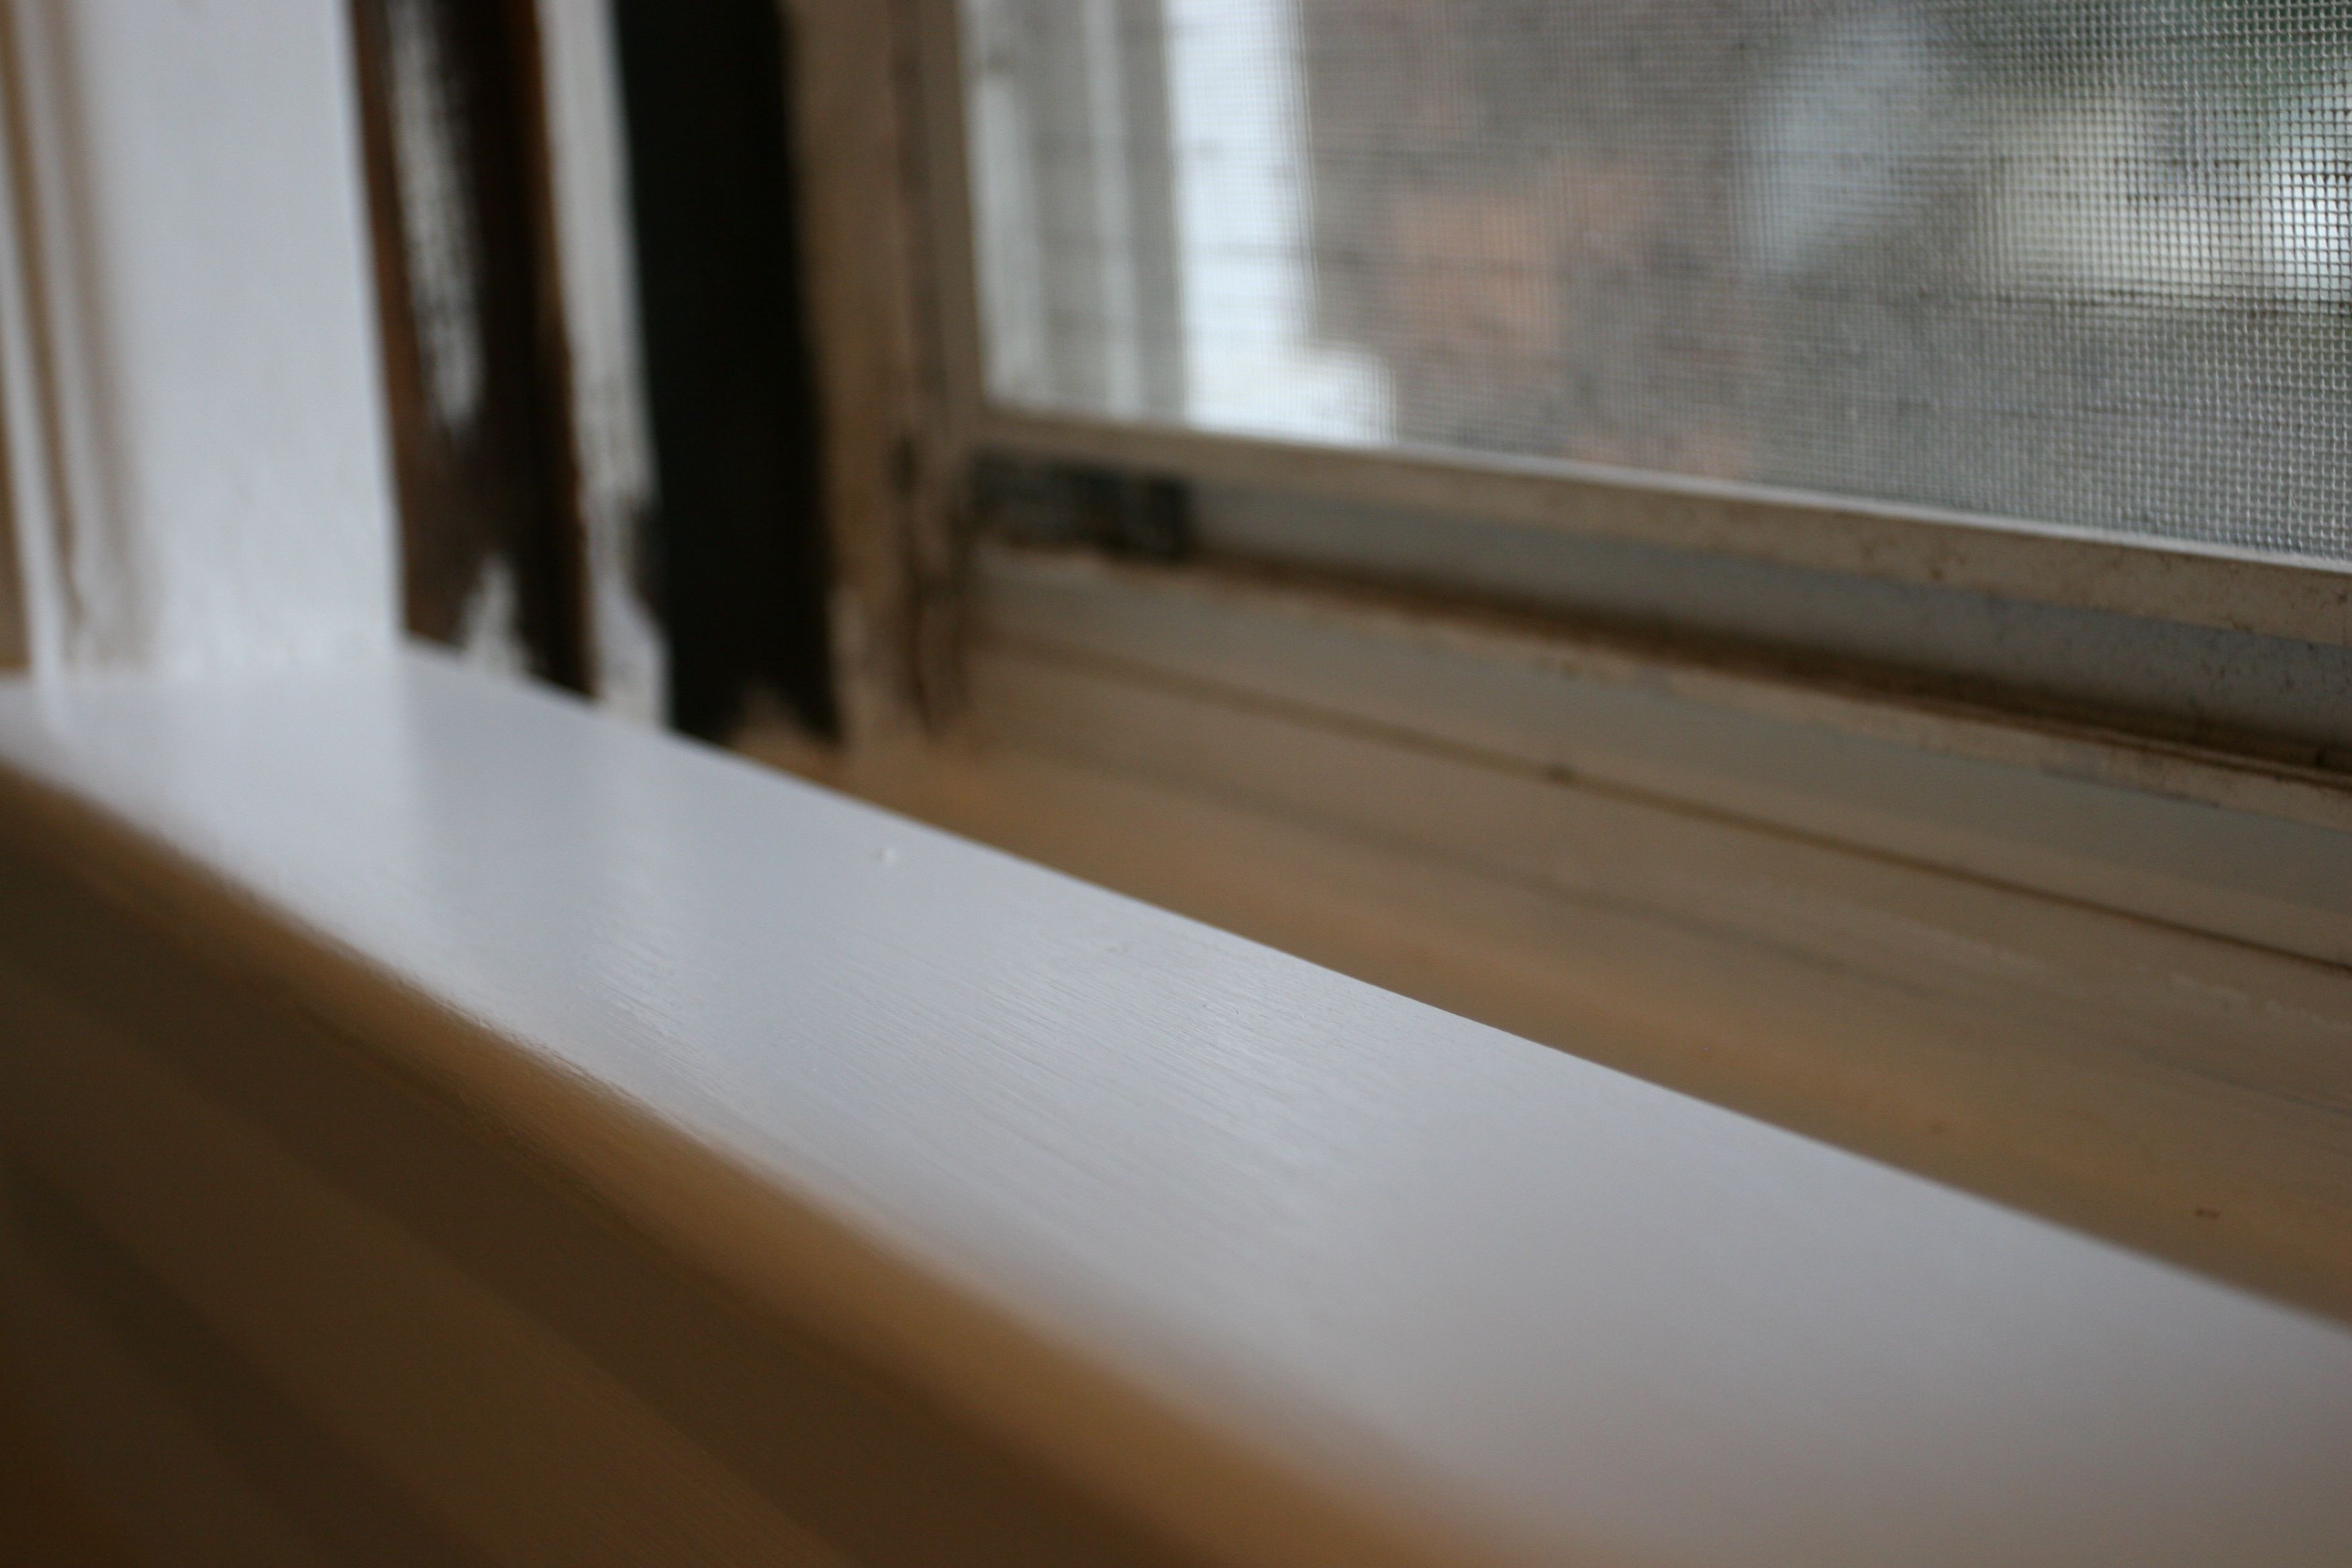 Windowsill, painted. The window was painted, scraped, sanded and refurbished. Looks like old/new.